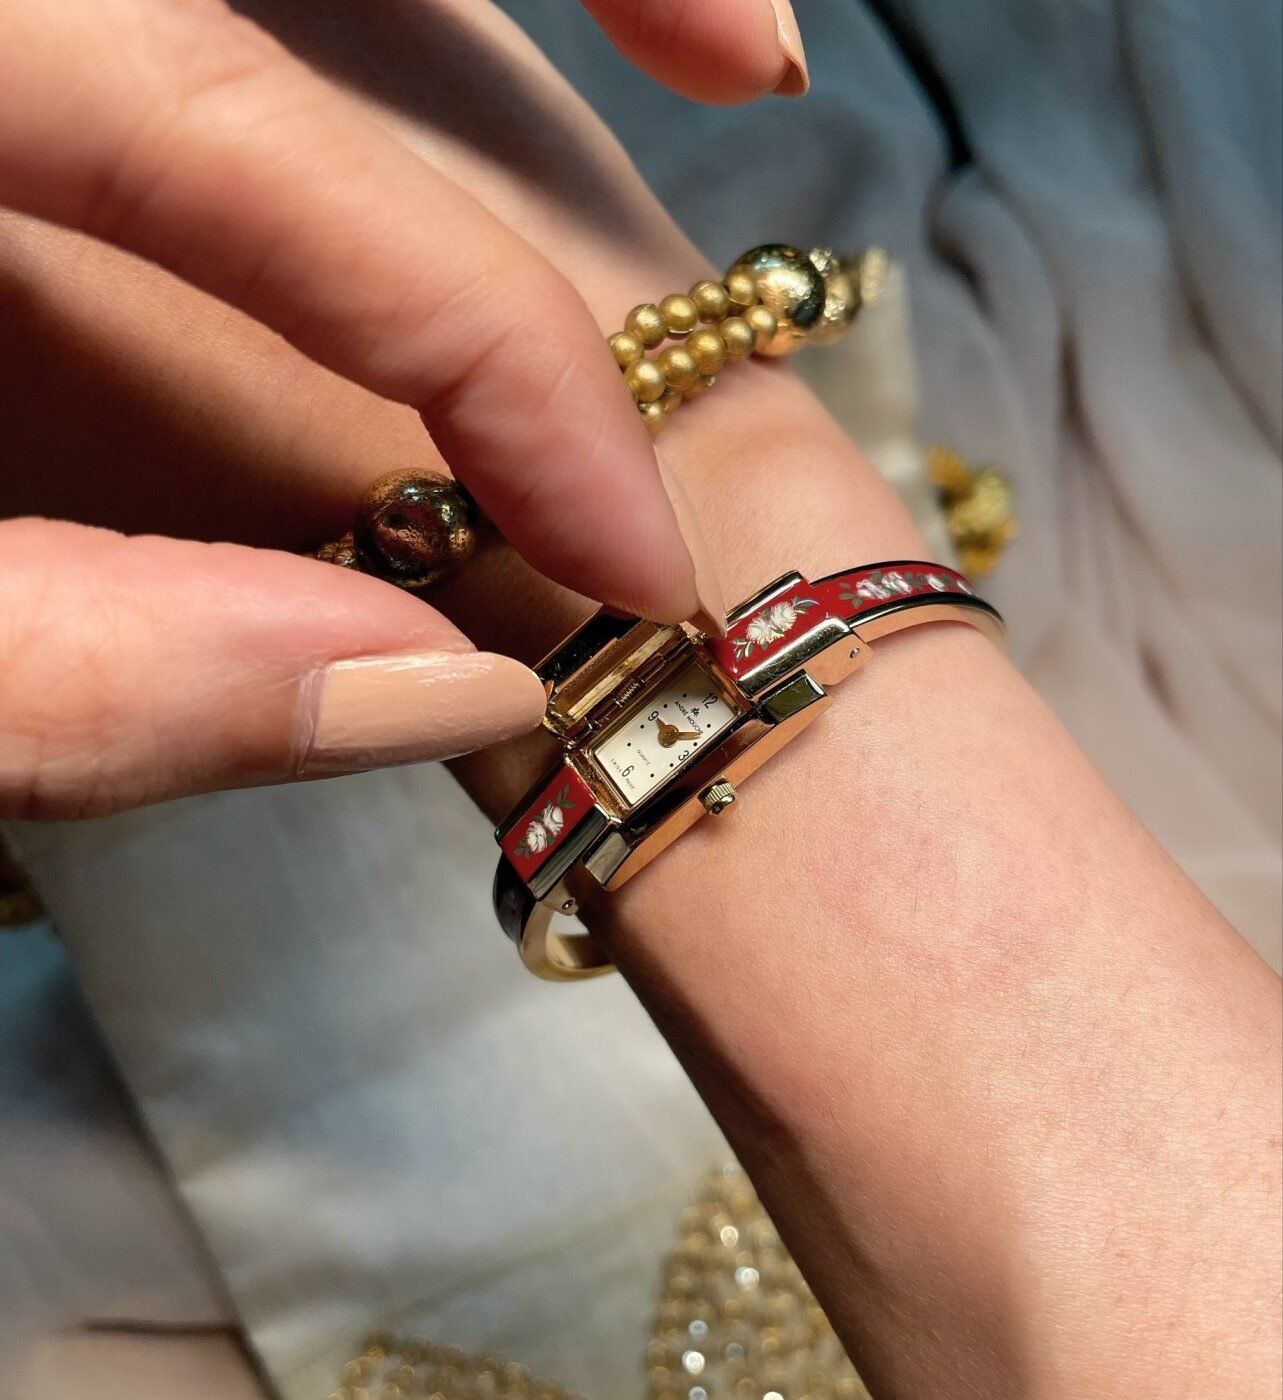 André Mouche: Accessible enamelled jewels for your wrist